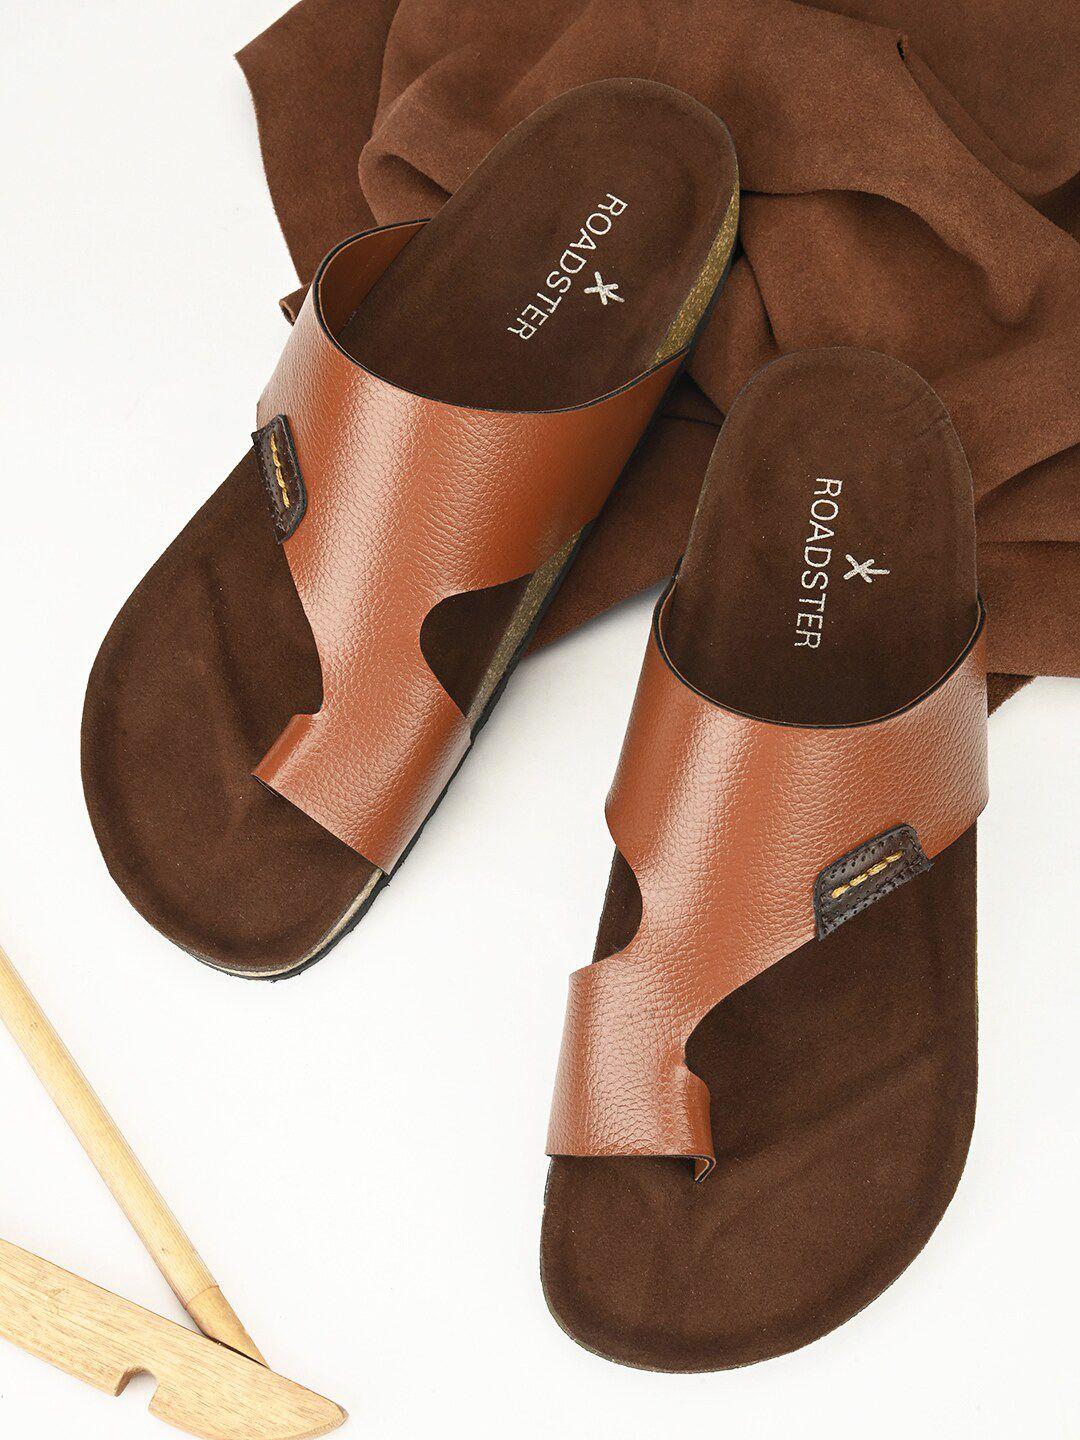 The Roadster Lifestyle Co. Leather Comfort Sandals